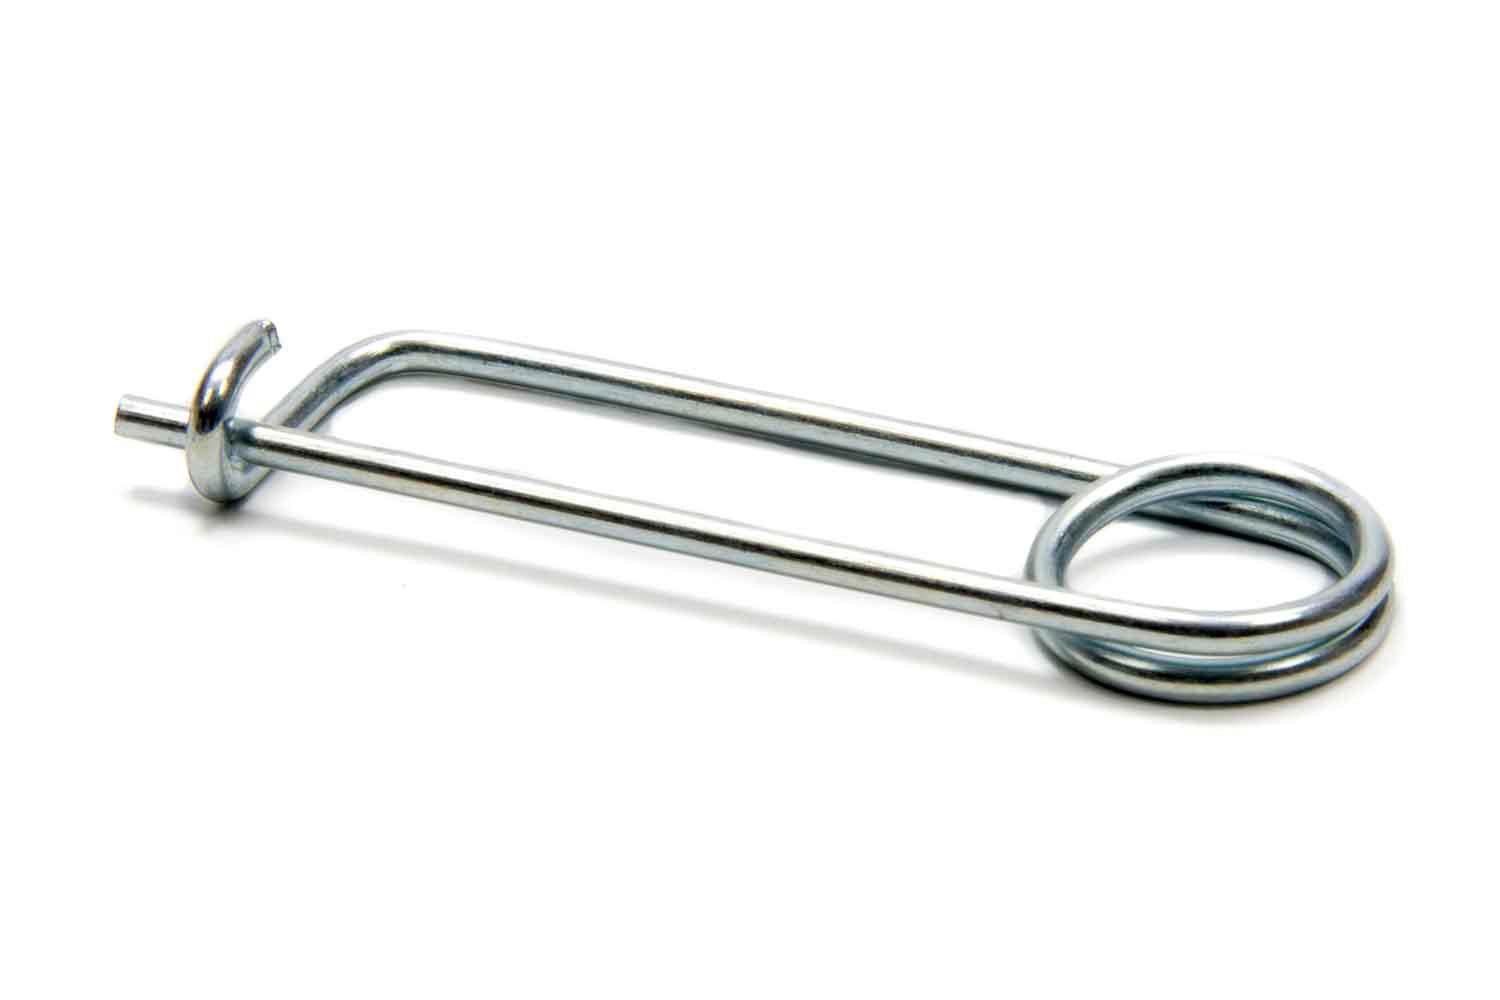 Diaper Pin - Burlile Performance Products